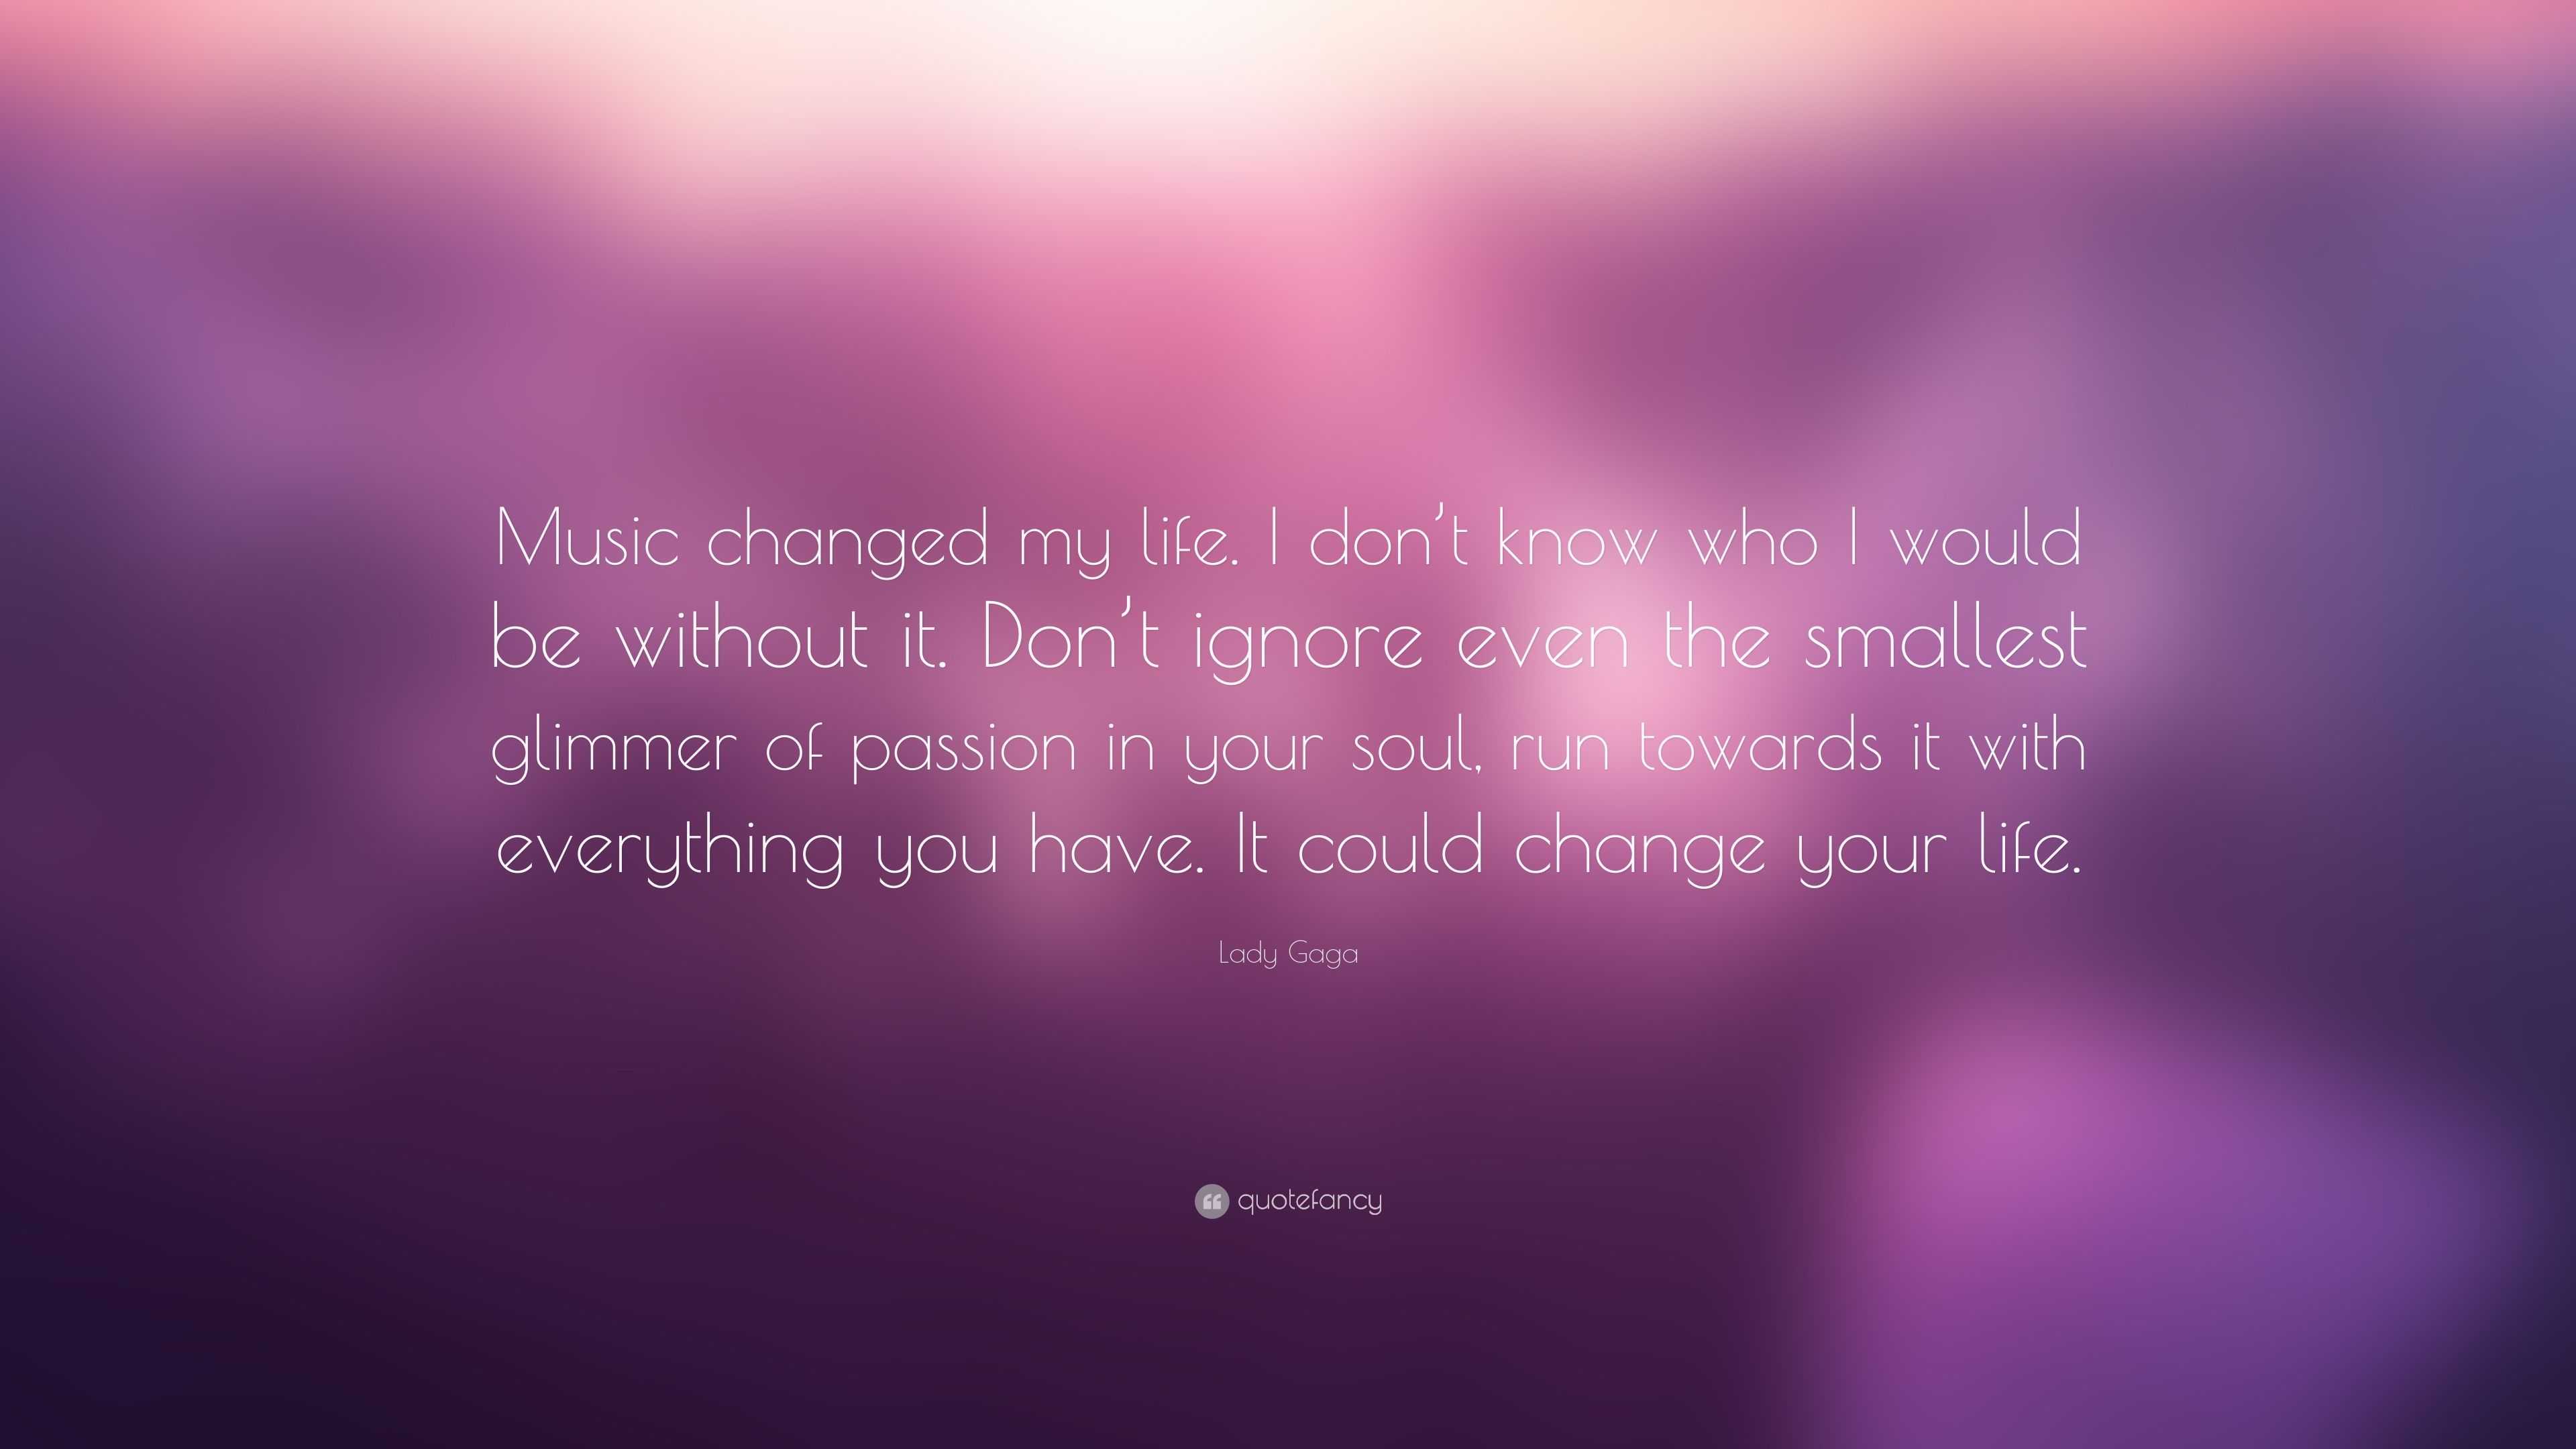 Lady Gaga Quote “Music changed my life I don t know who